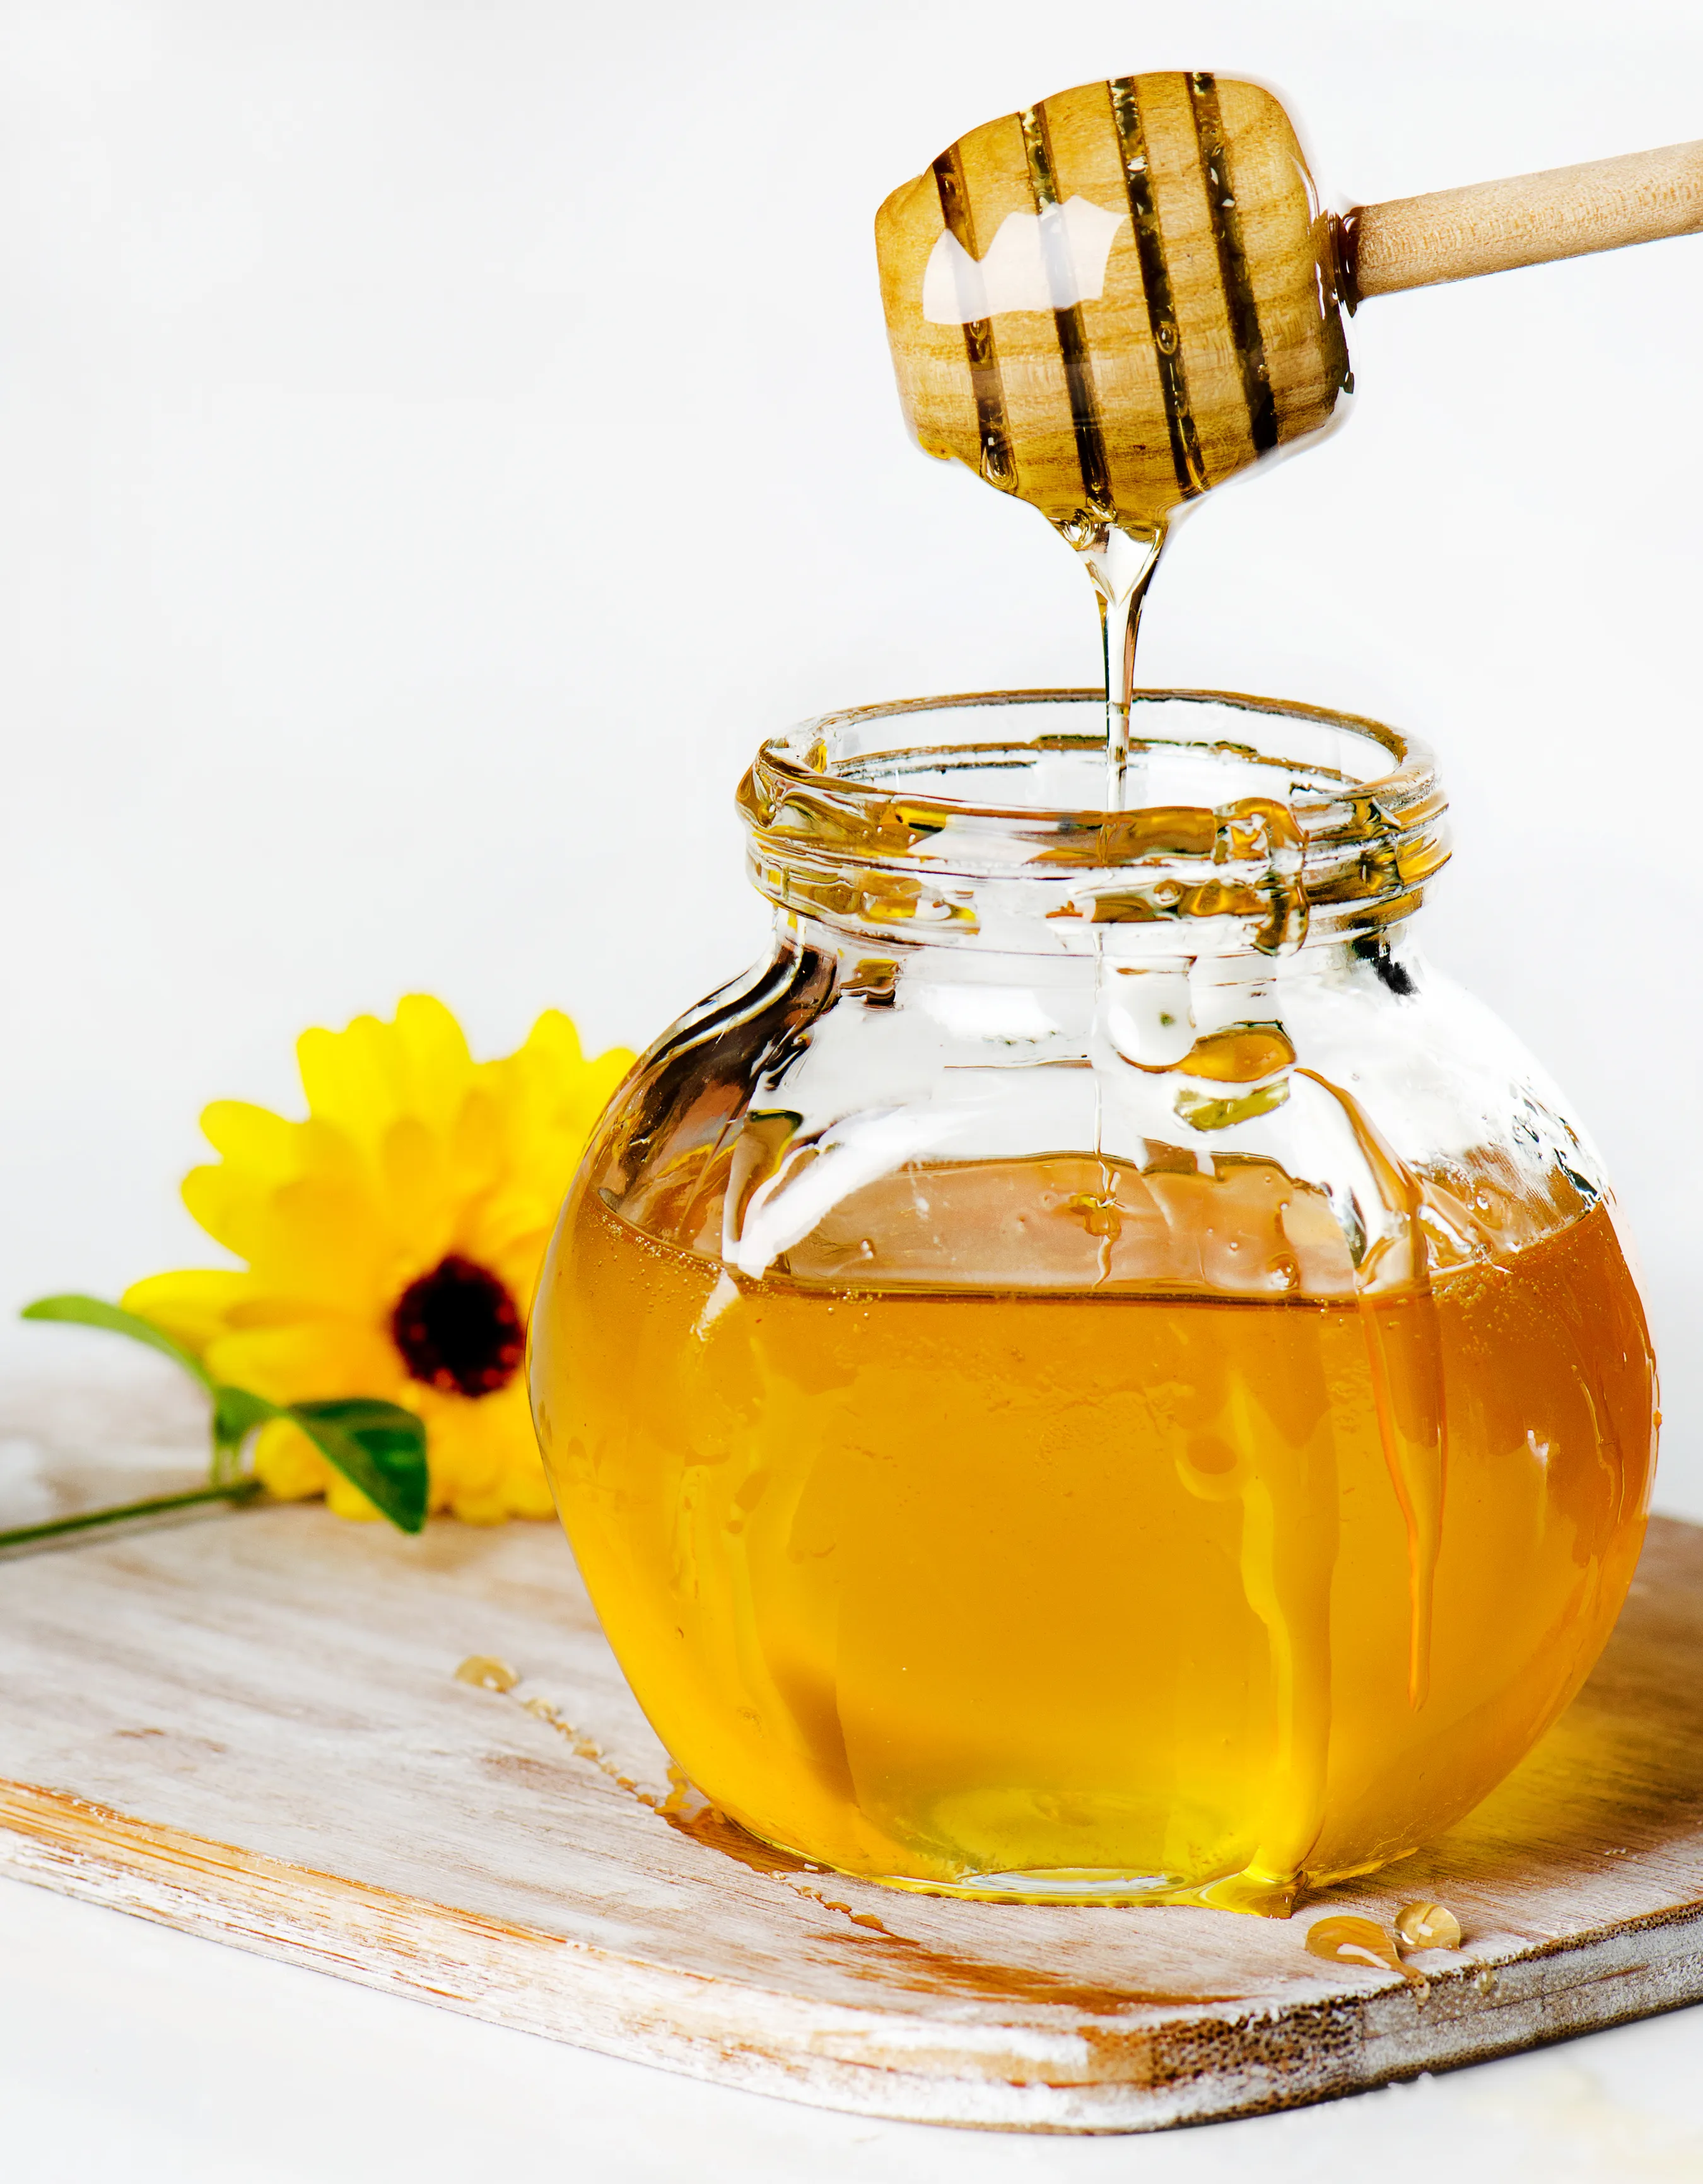 Honey dripping into jar - kind words are like hony